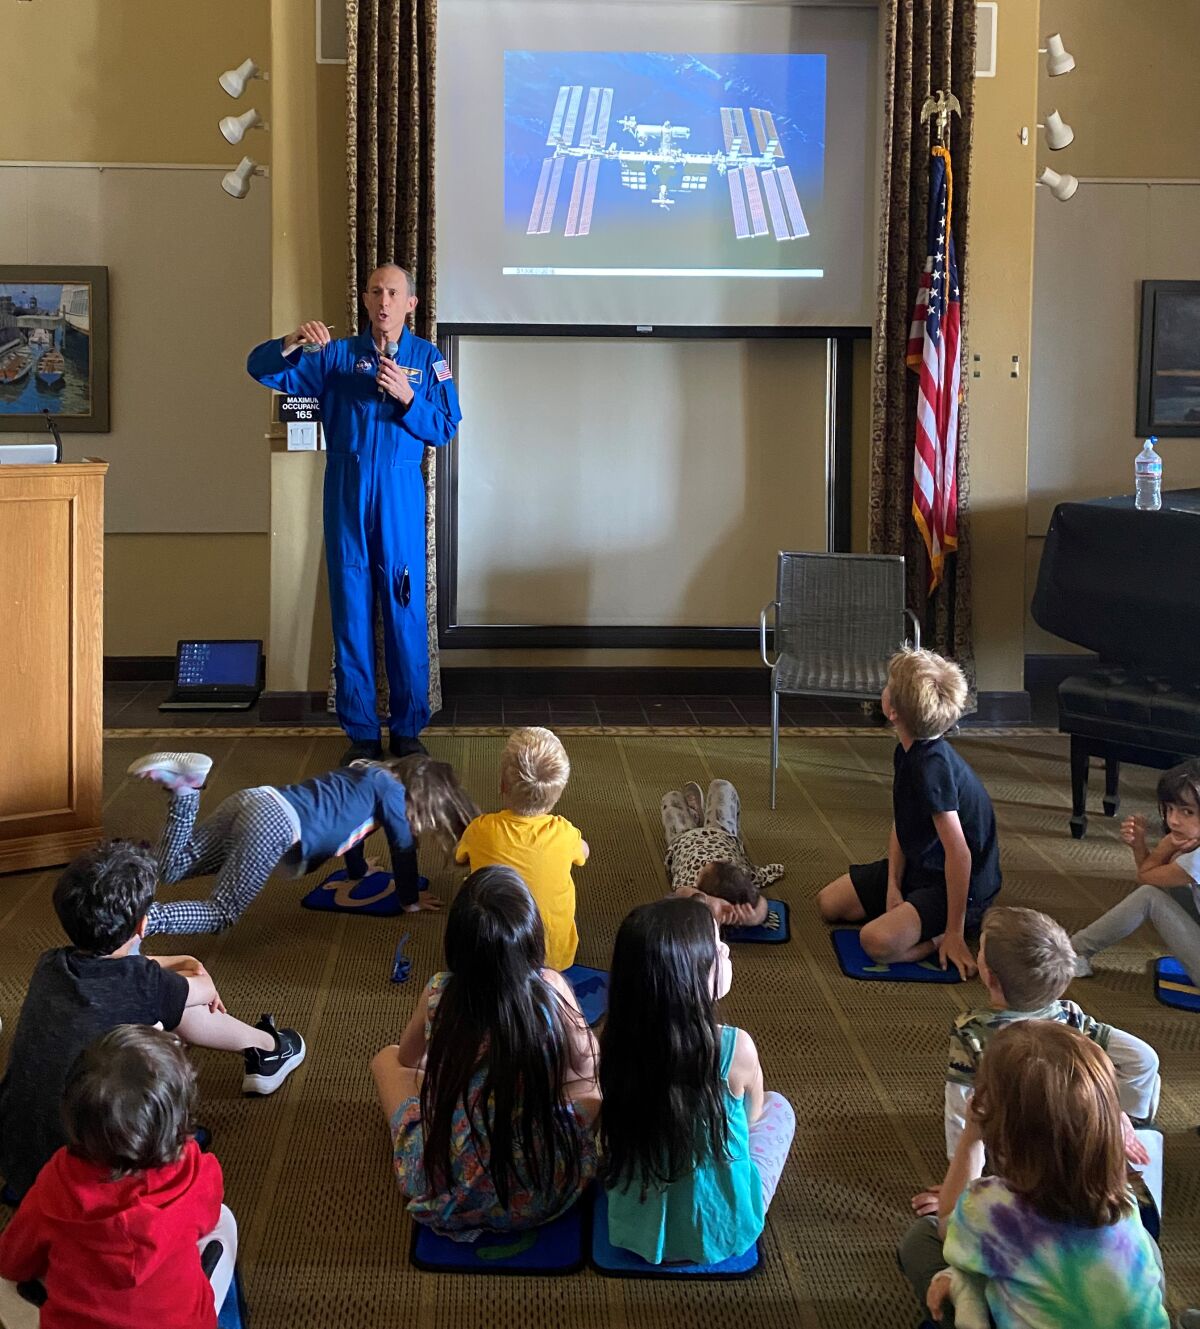 The La Jolla/Riford Library's "So You Want to be an Astronaut?” program was led by James Hansen Newman.